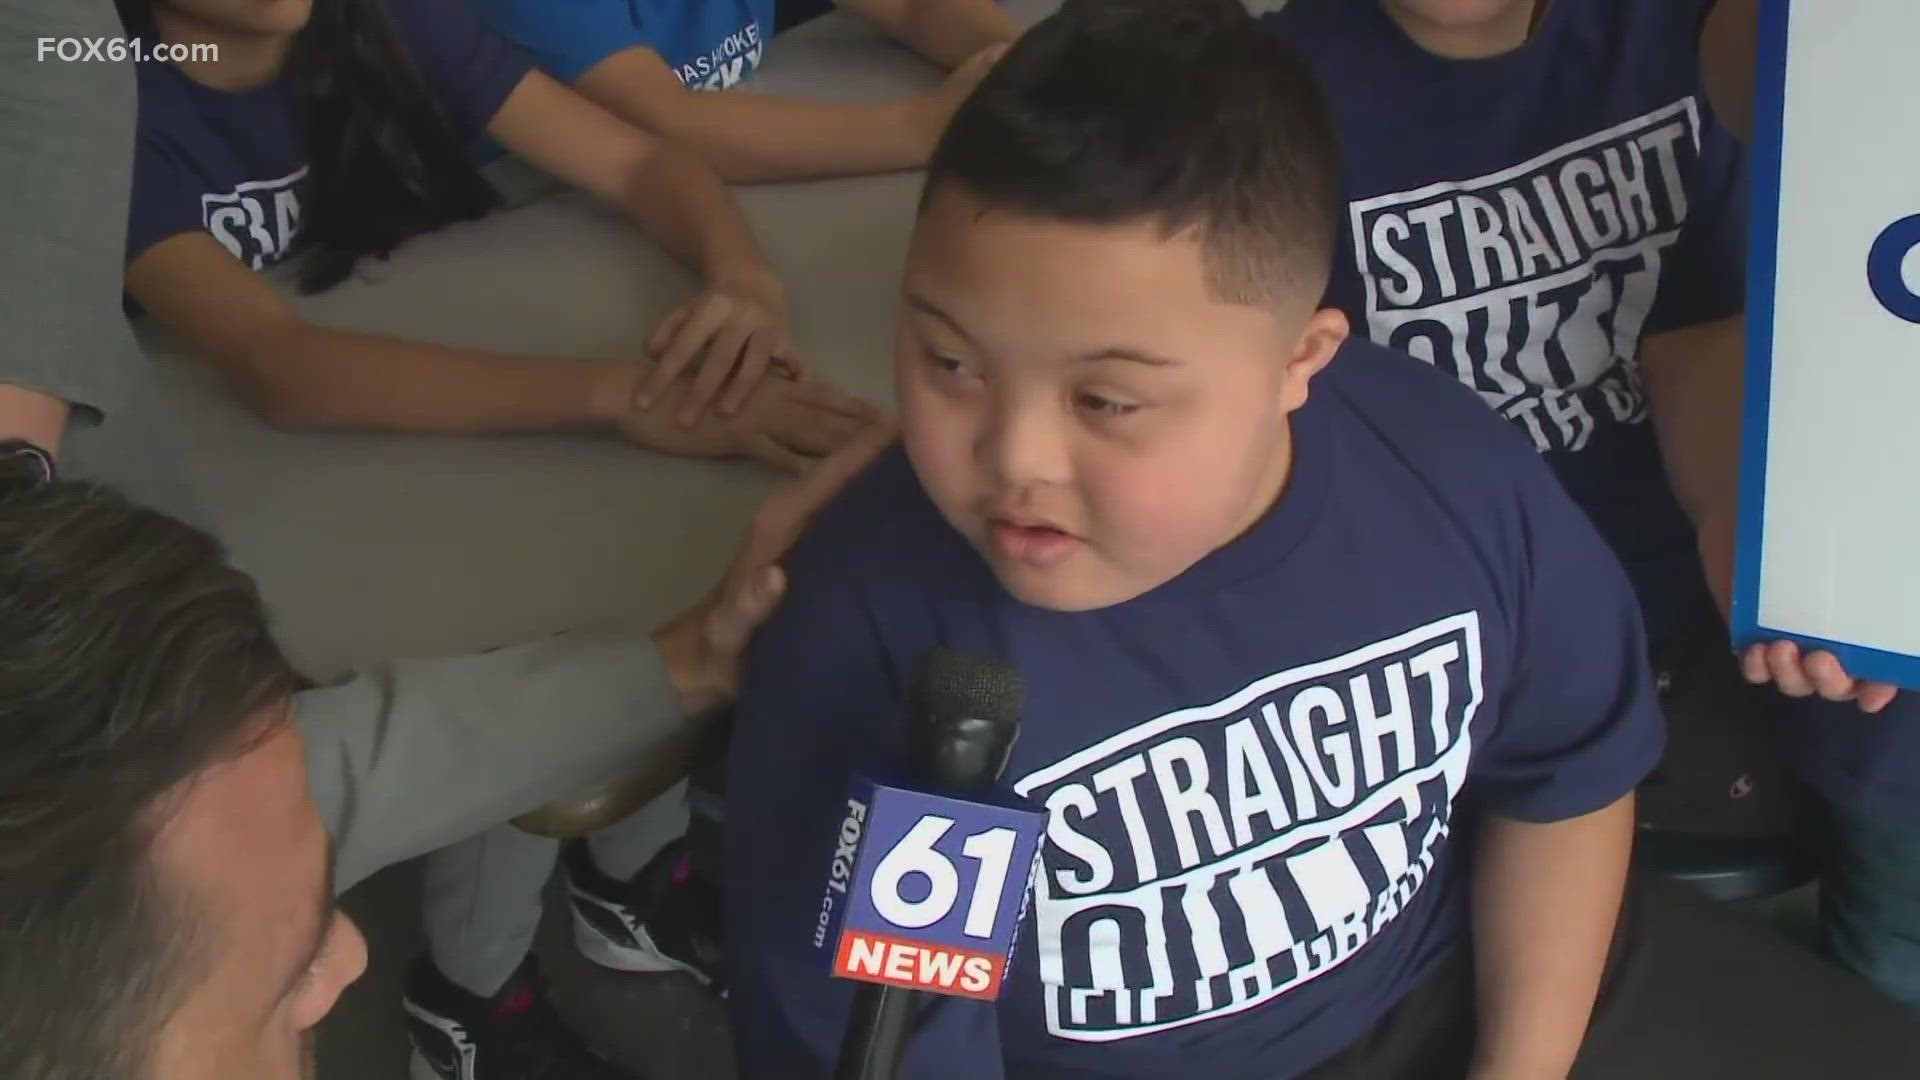 Classmates of 5th grader AJ share kind thoughts as they celebrate his bingo victory.